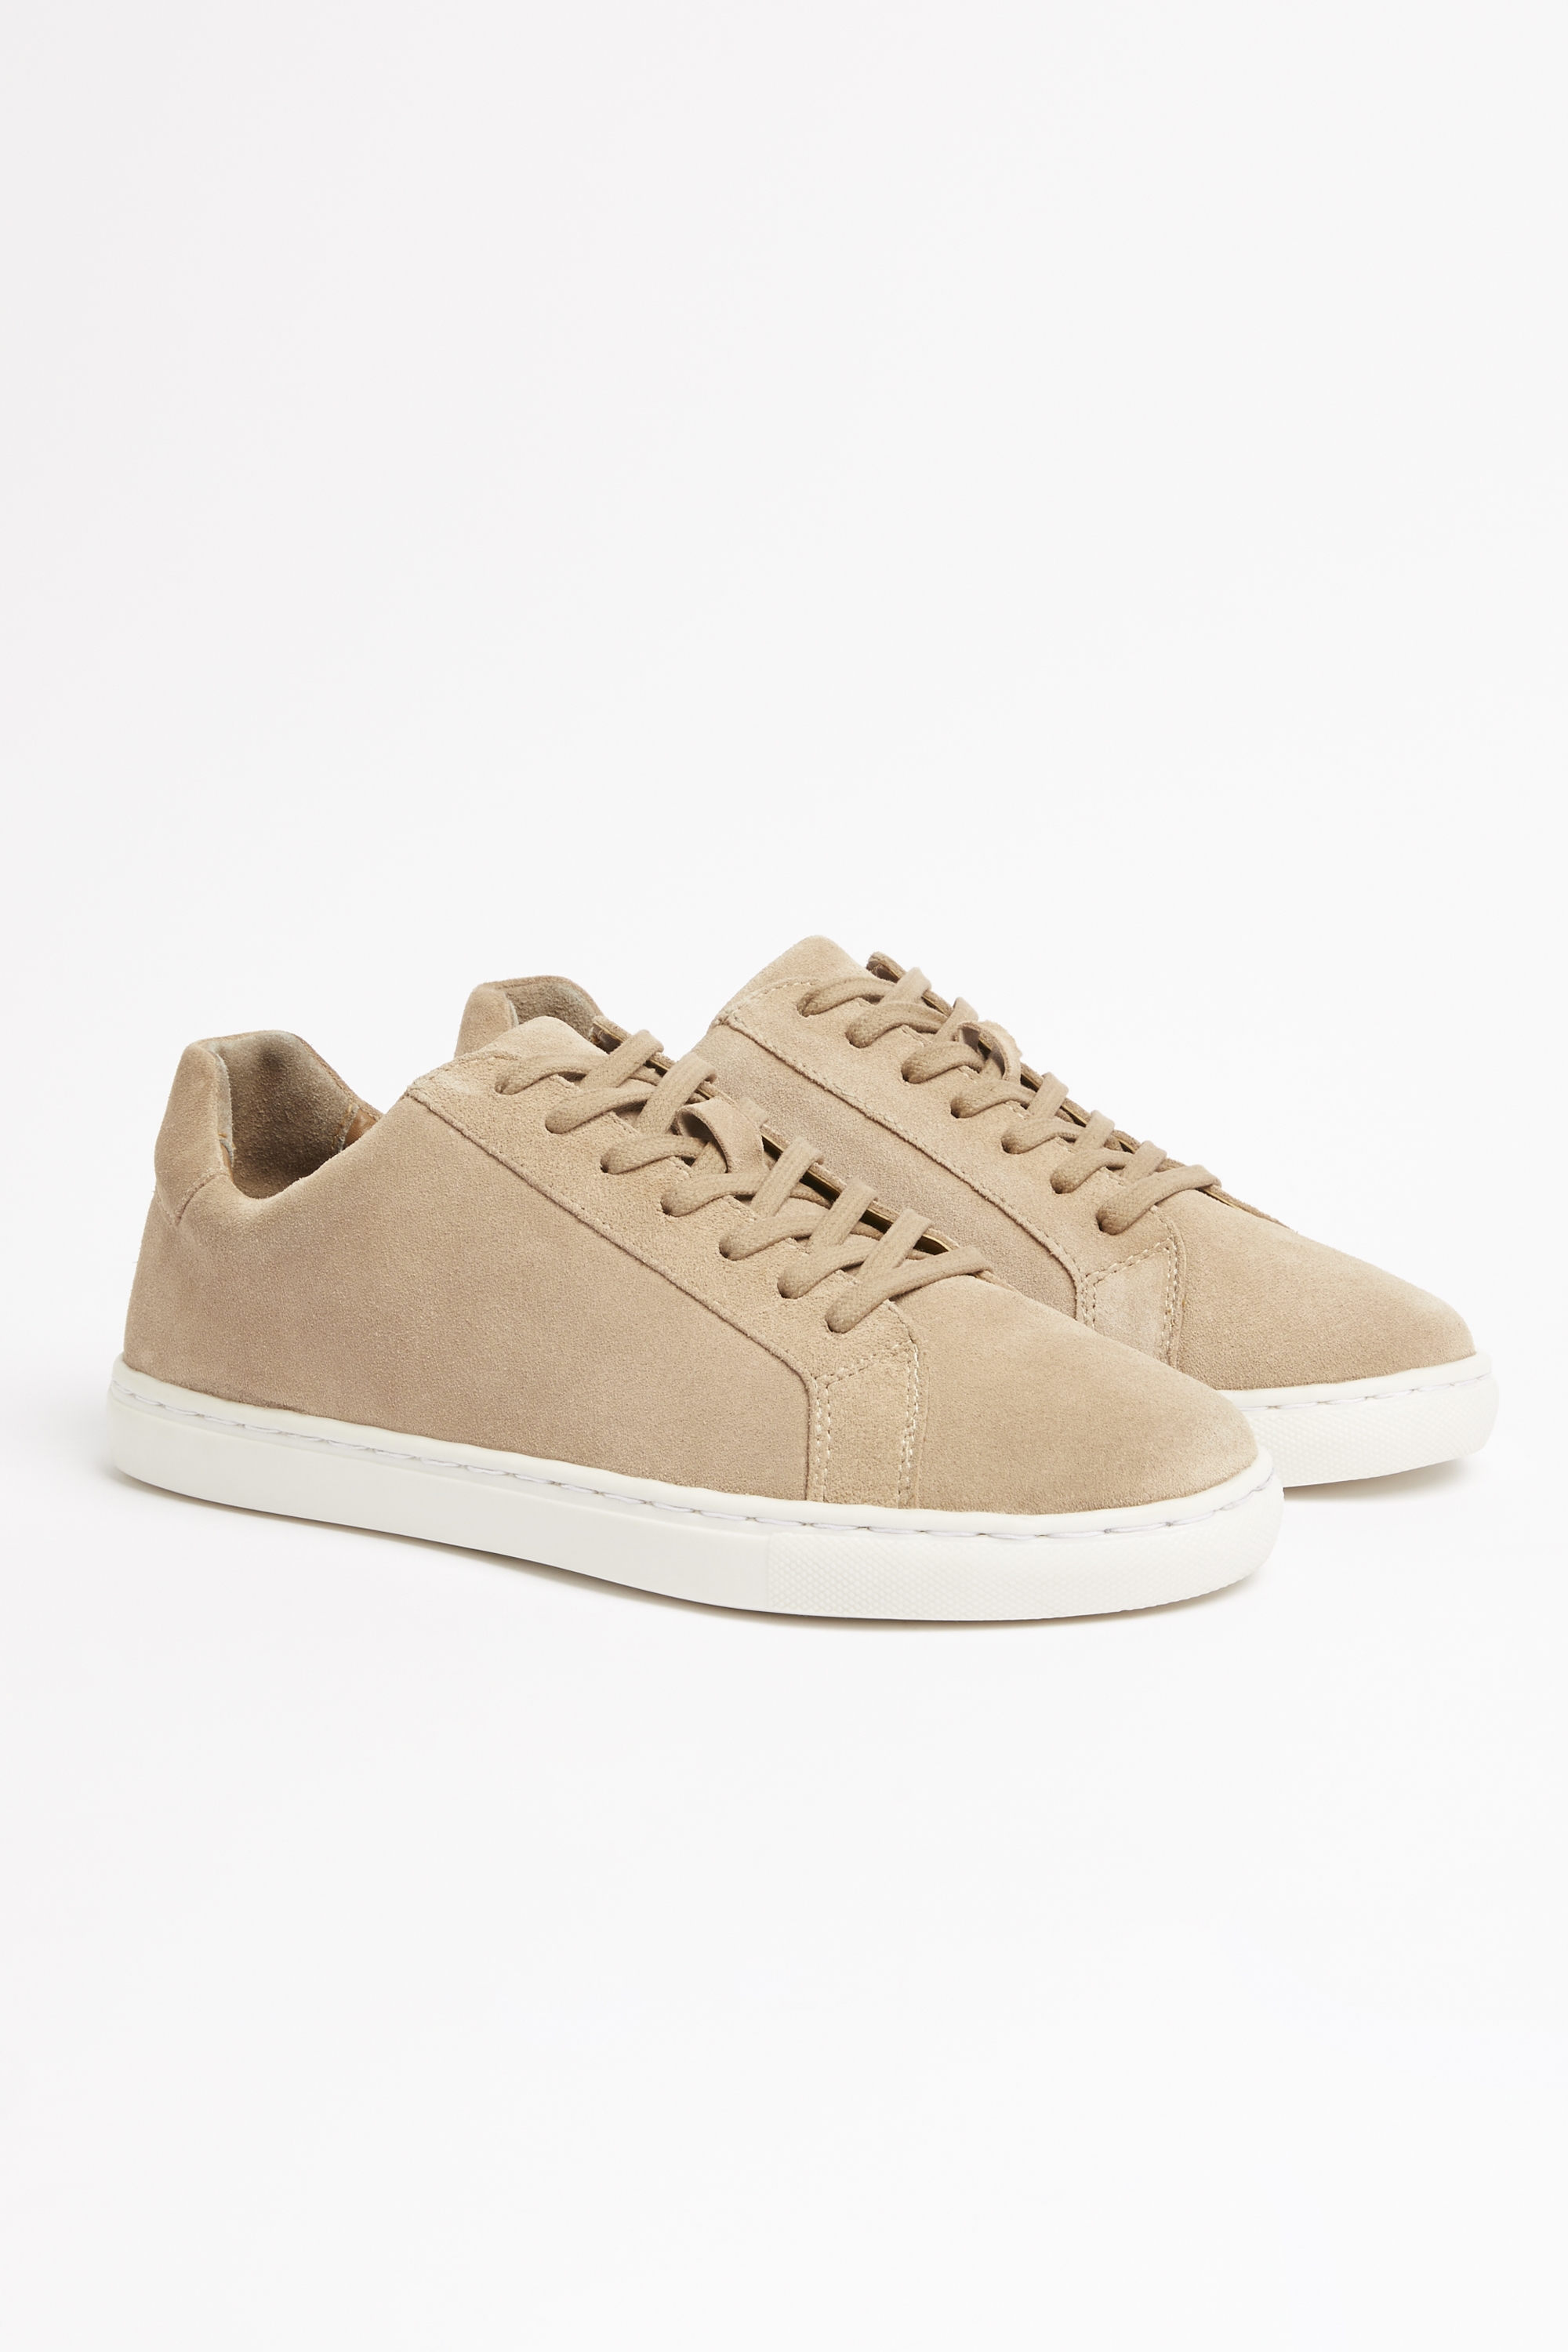 Camel Suede Trainers | Buy Online at Moss